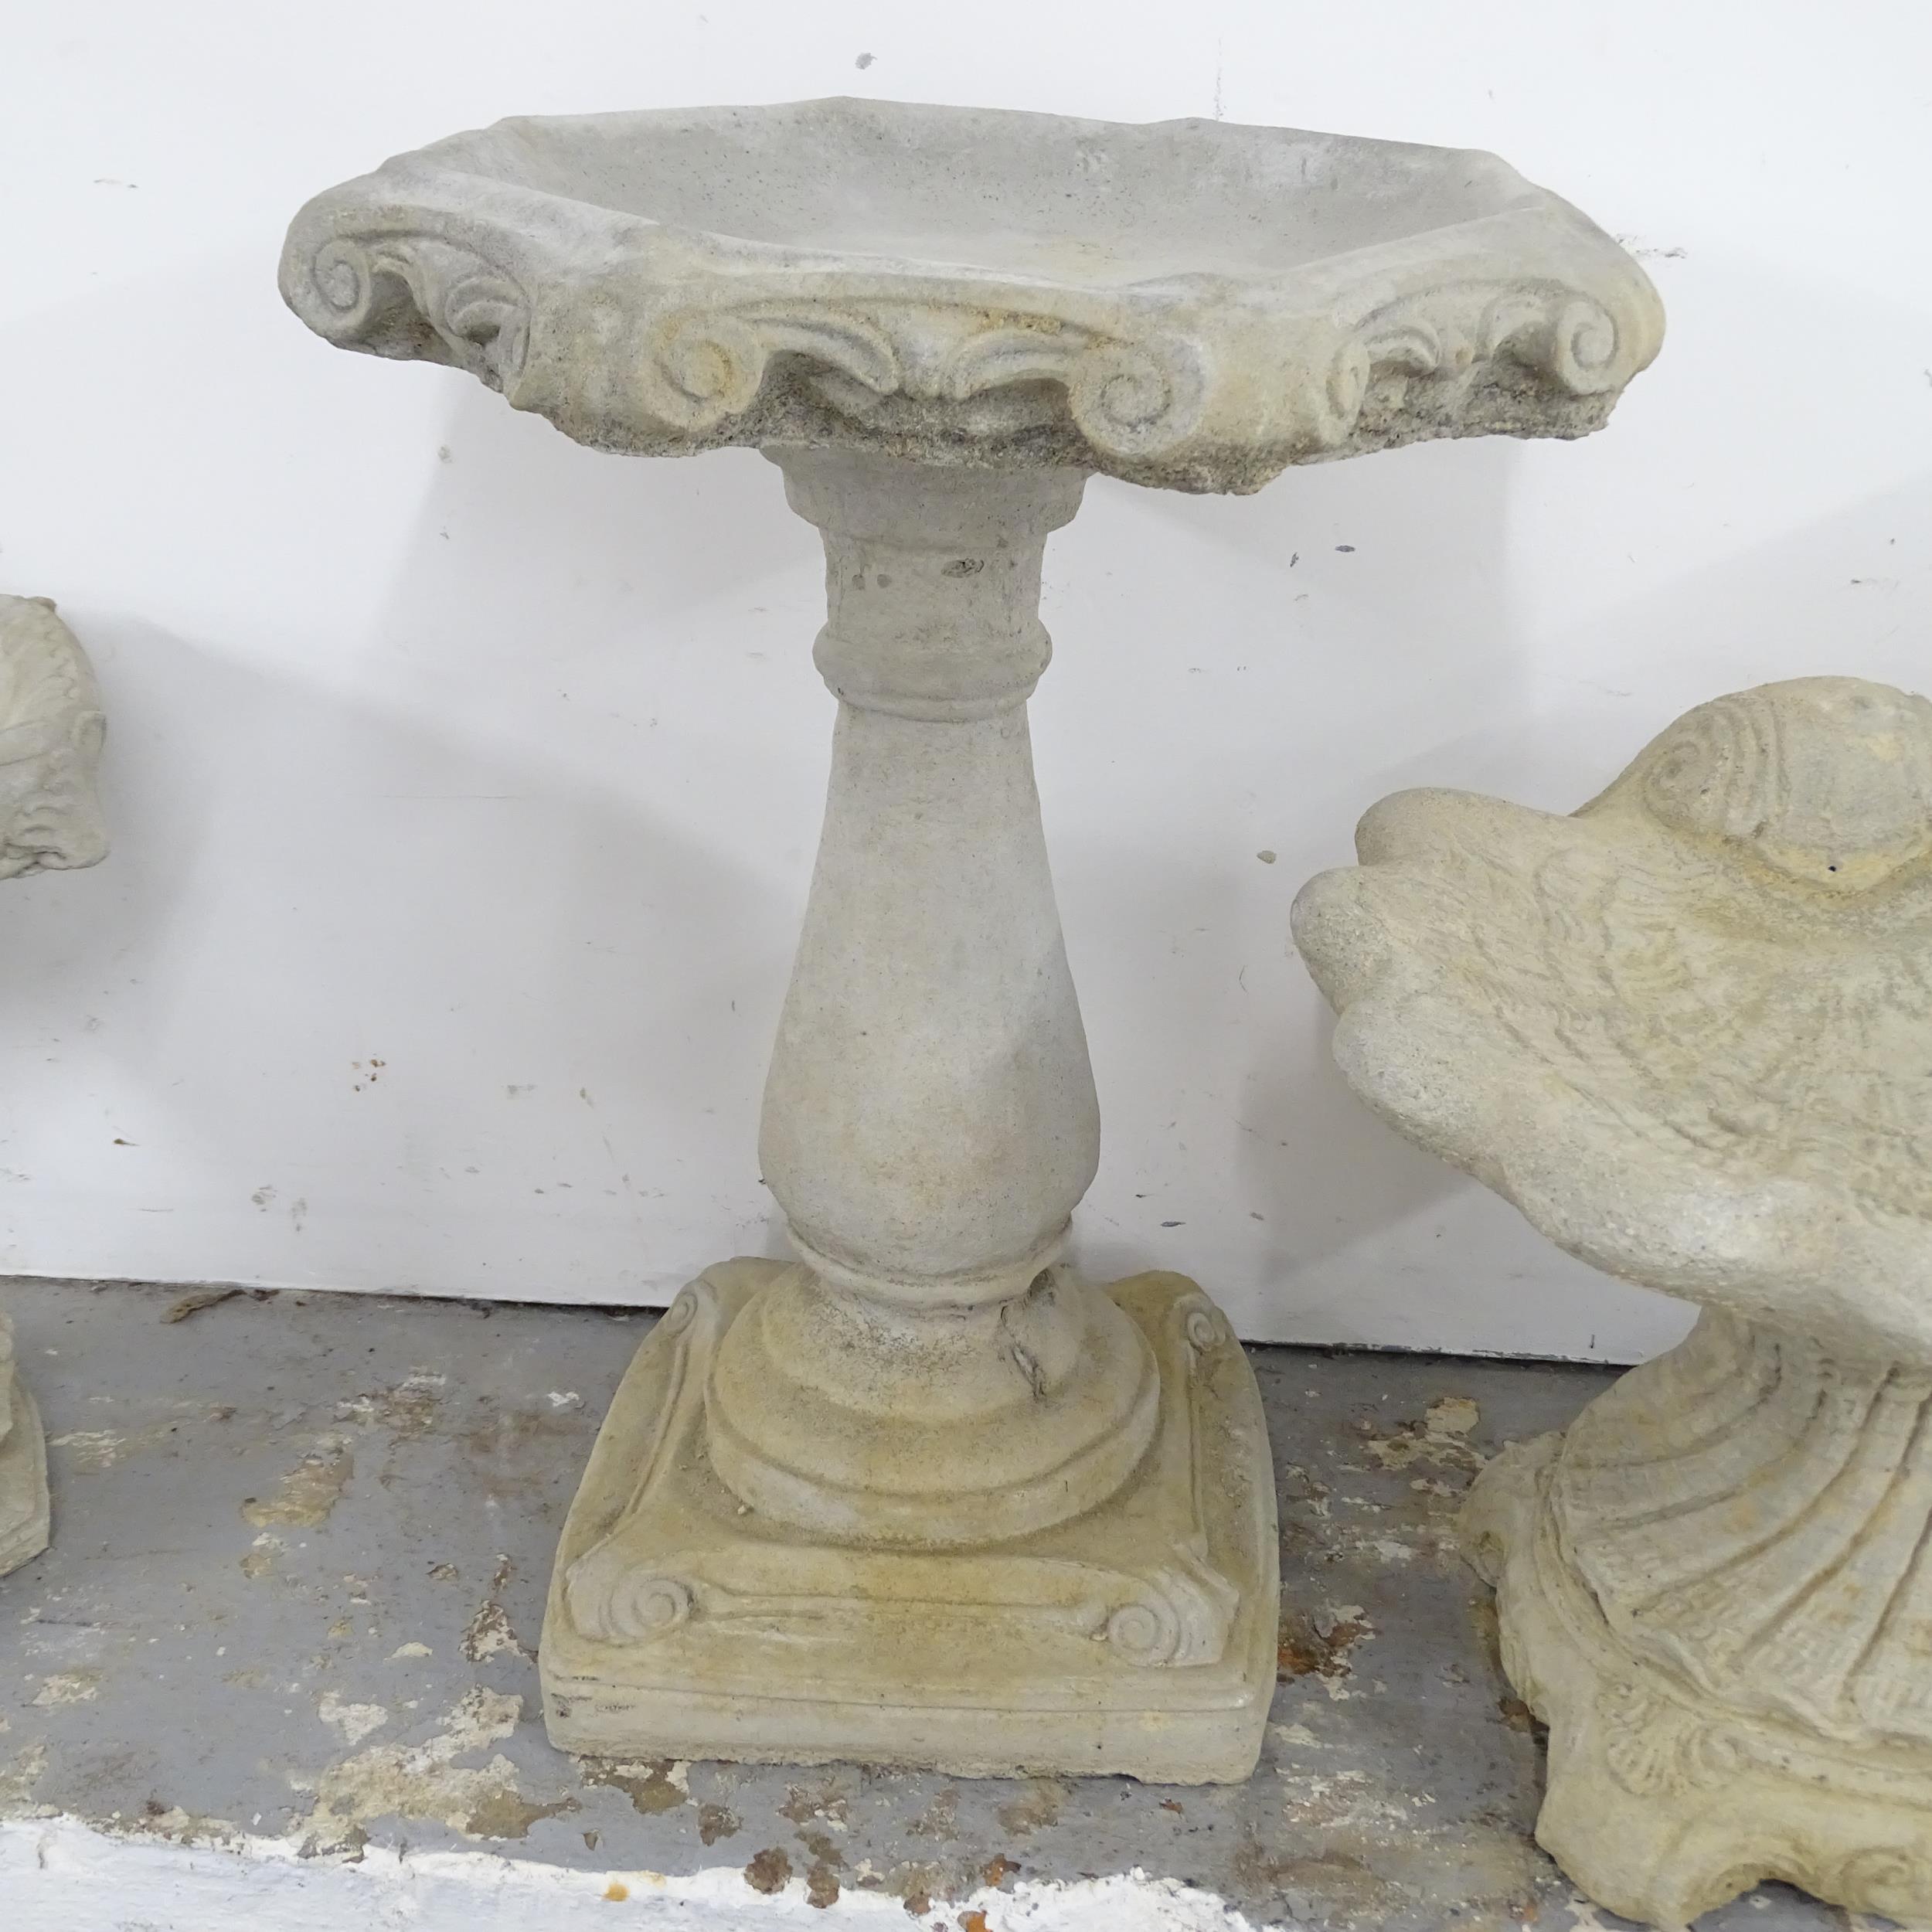 A two-section concrete bird bath with scroll decoration. 49x67cm